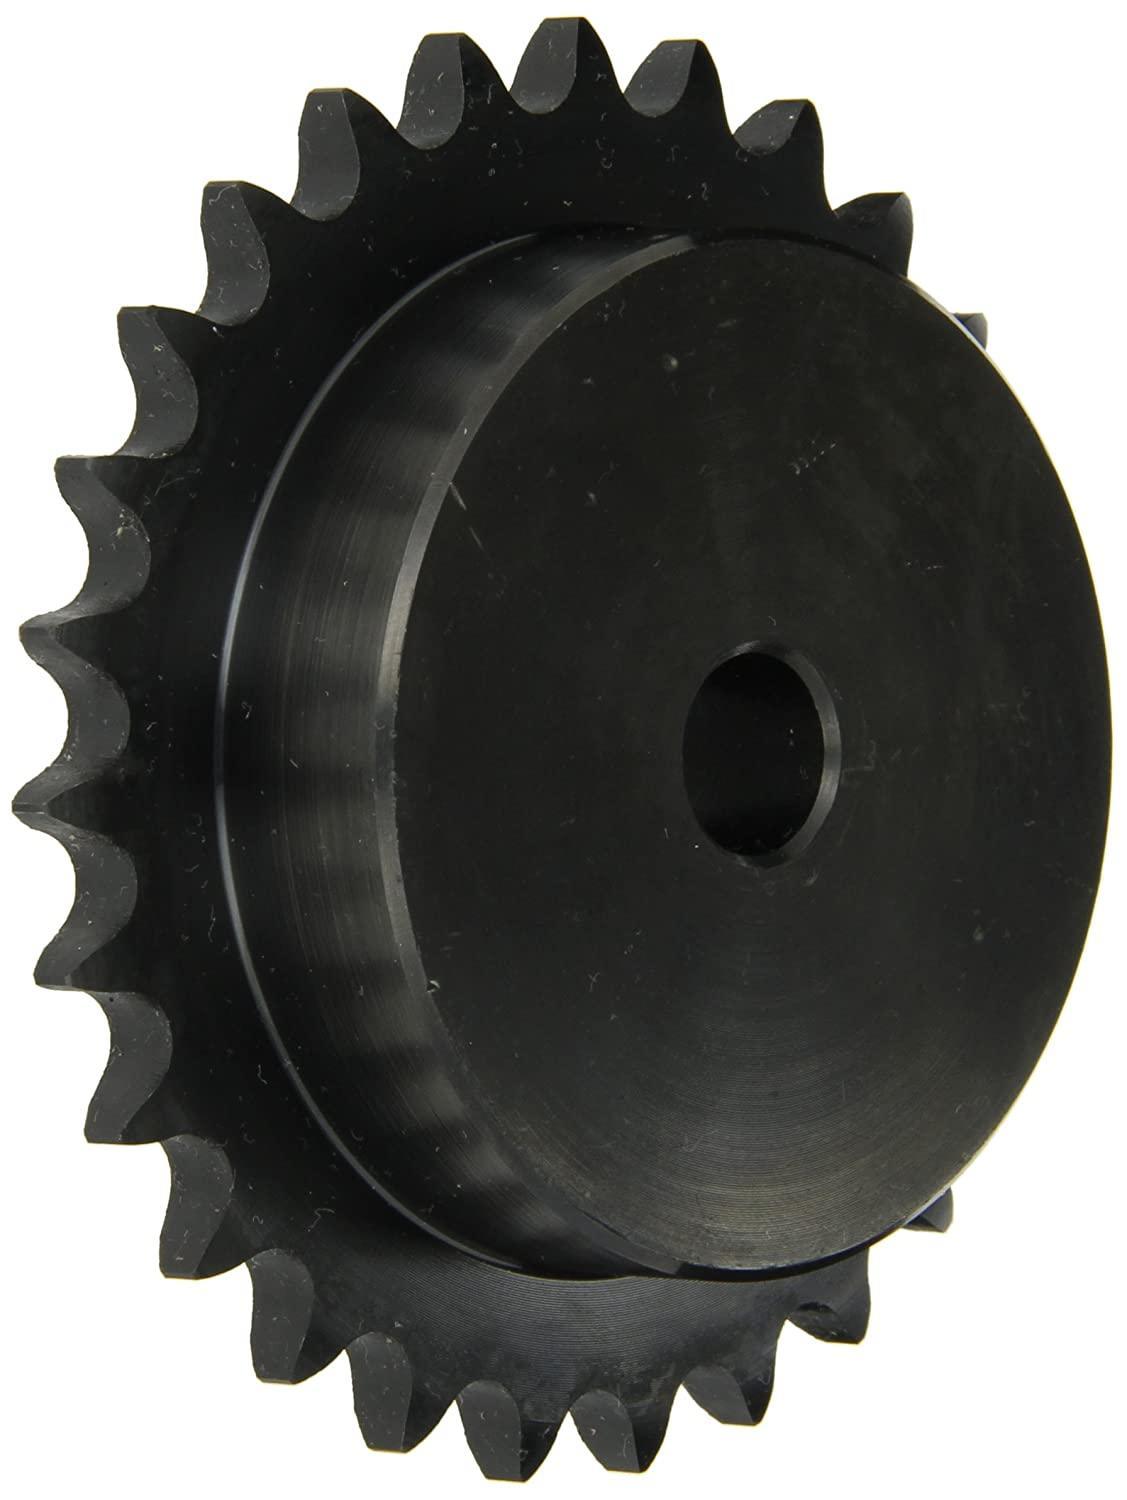 50B19H Roller Chain Sprocket With Stock Bore - Forces Inc